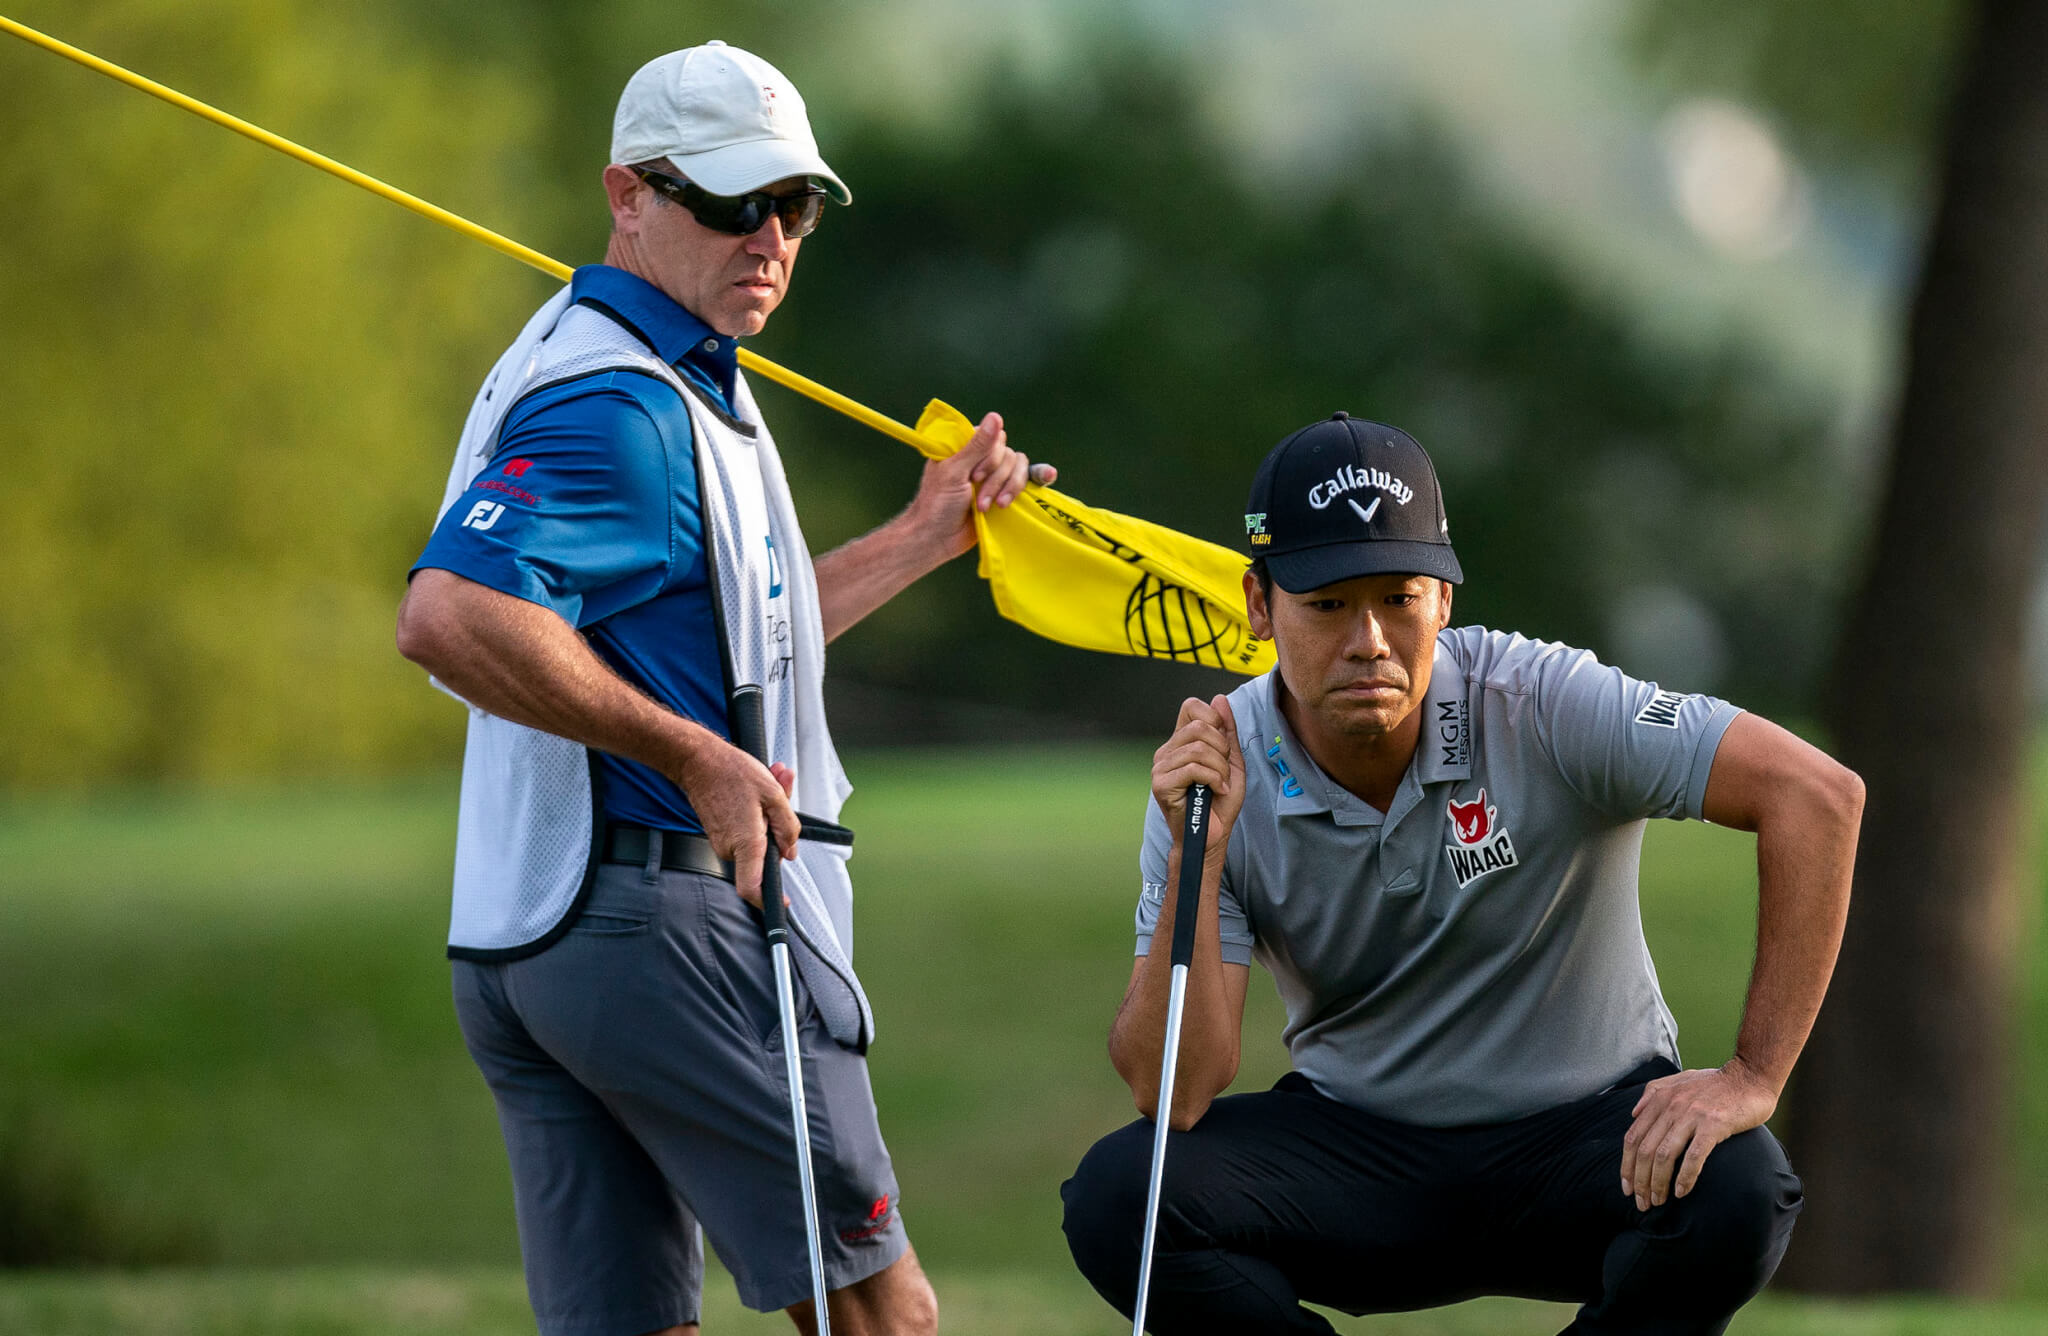 The story behind how Kevin Na and longtime caddie Kenny Harms linked up ...